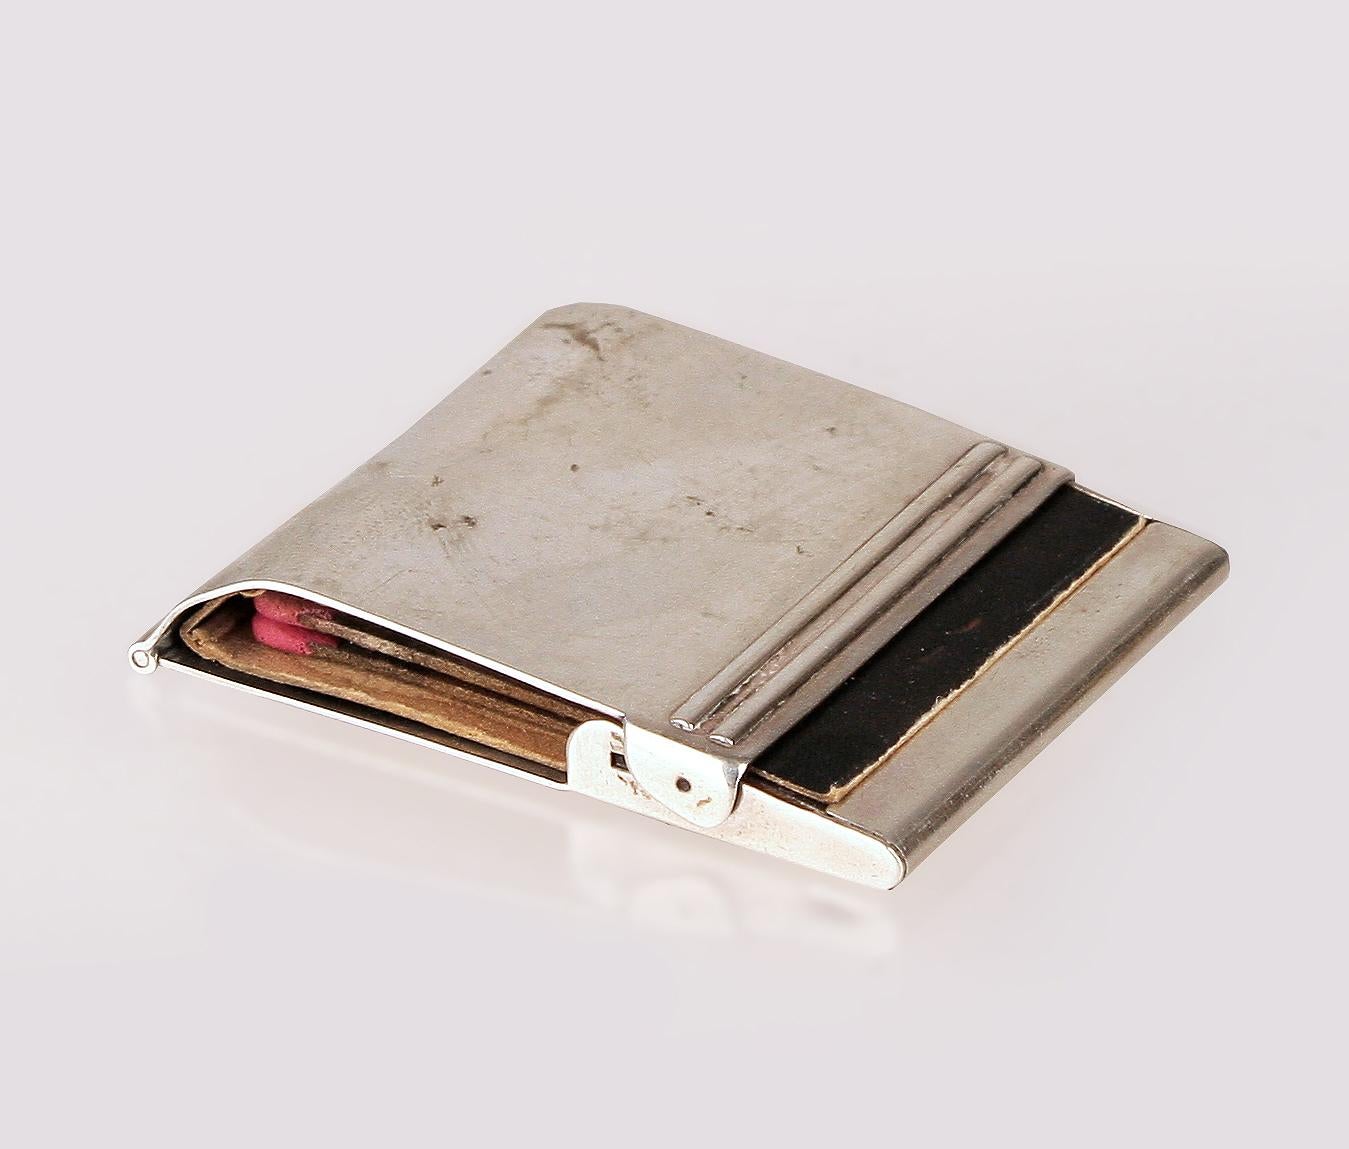 Mid-20th Century Sterling Silver Matchbook Cover/Match Holder by Tiffany & Co. In Fair Condition For Sale In North Miami, FL